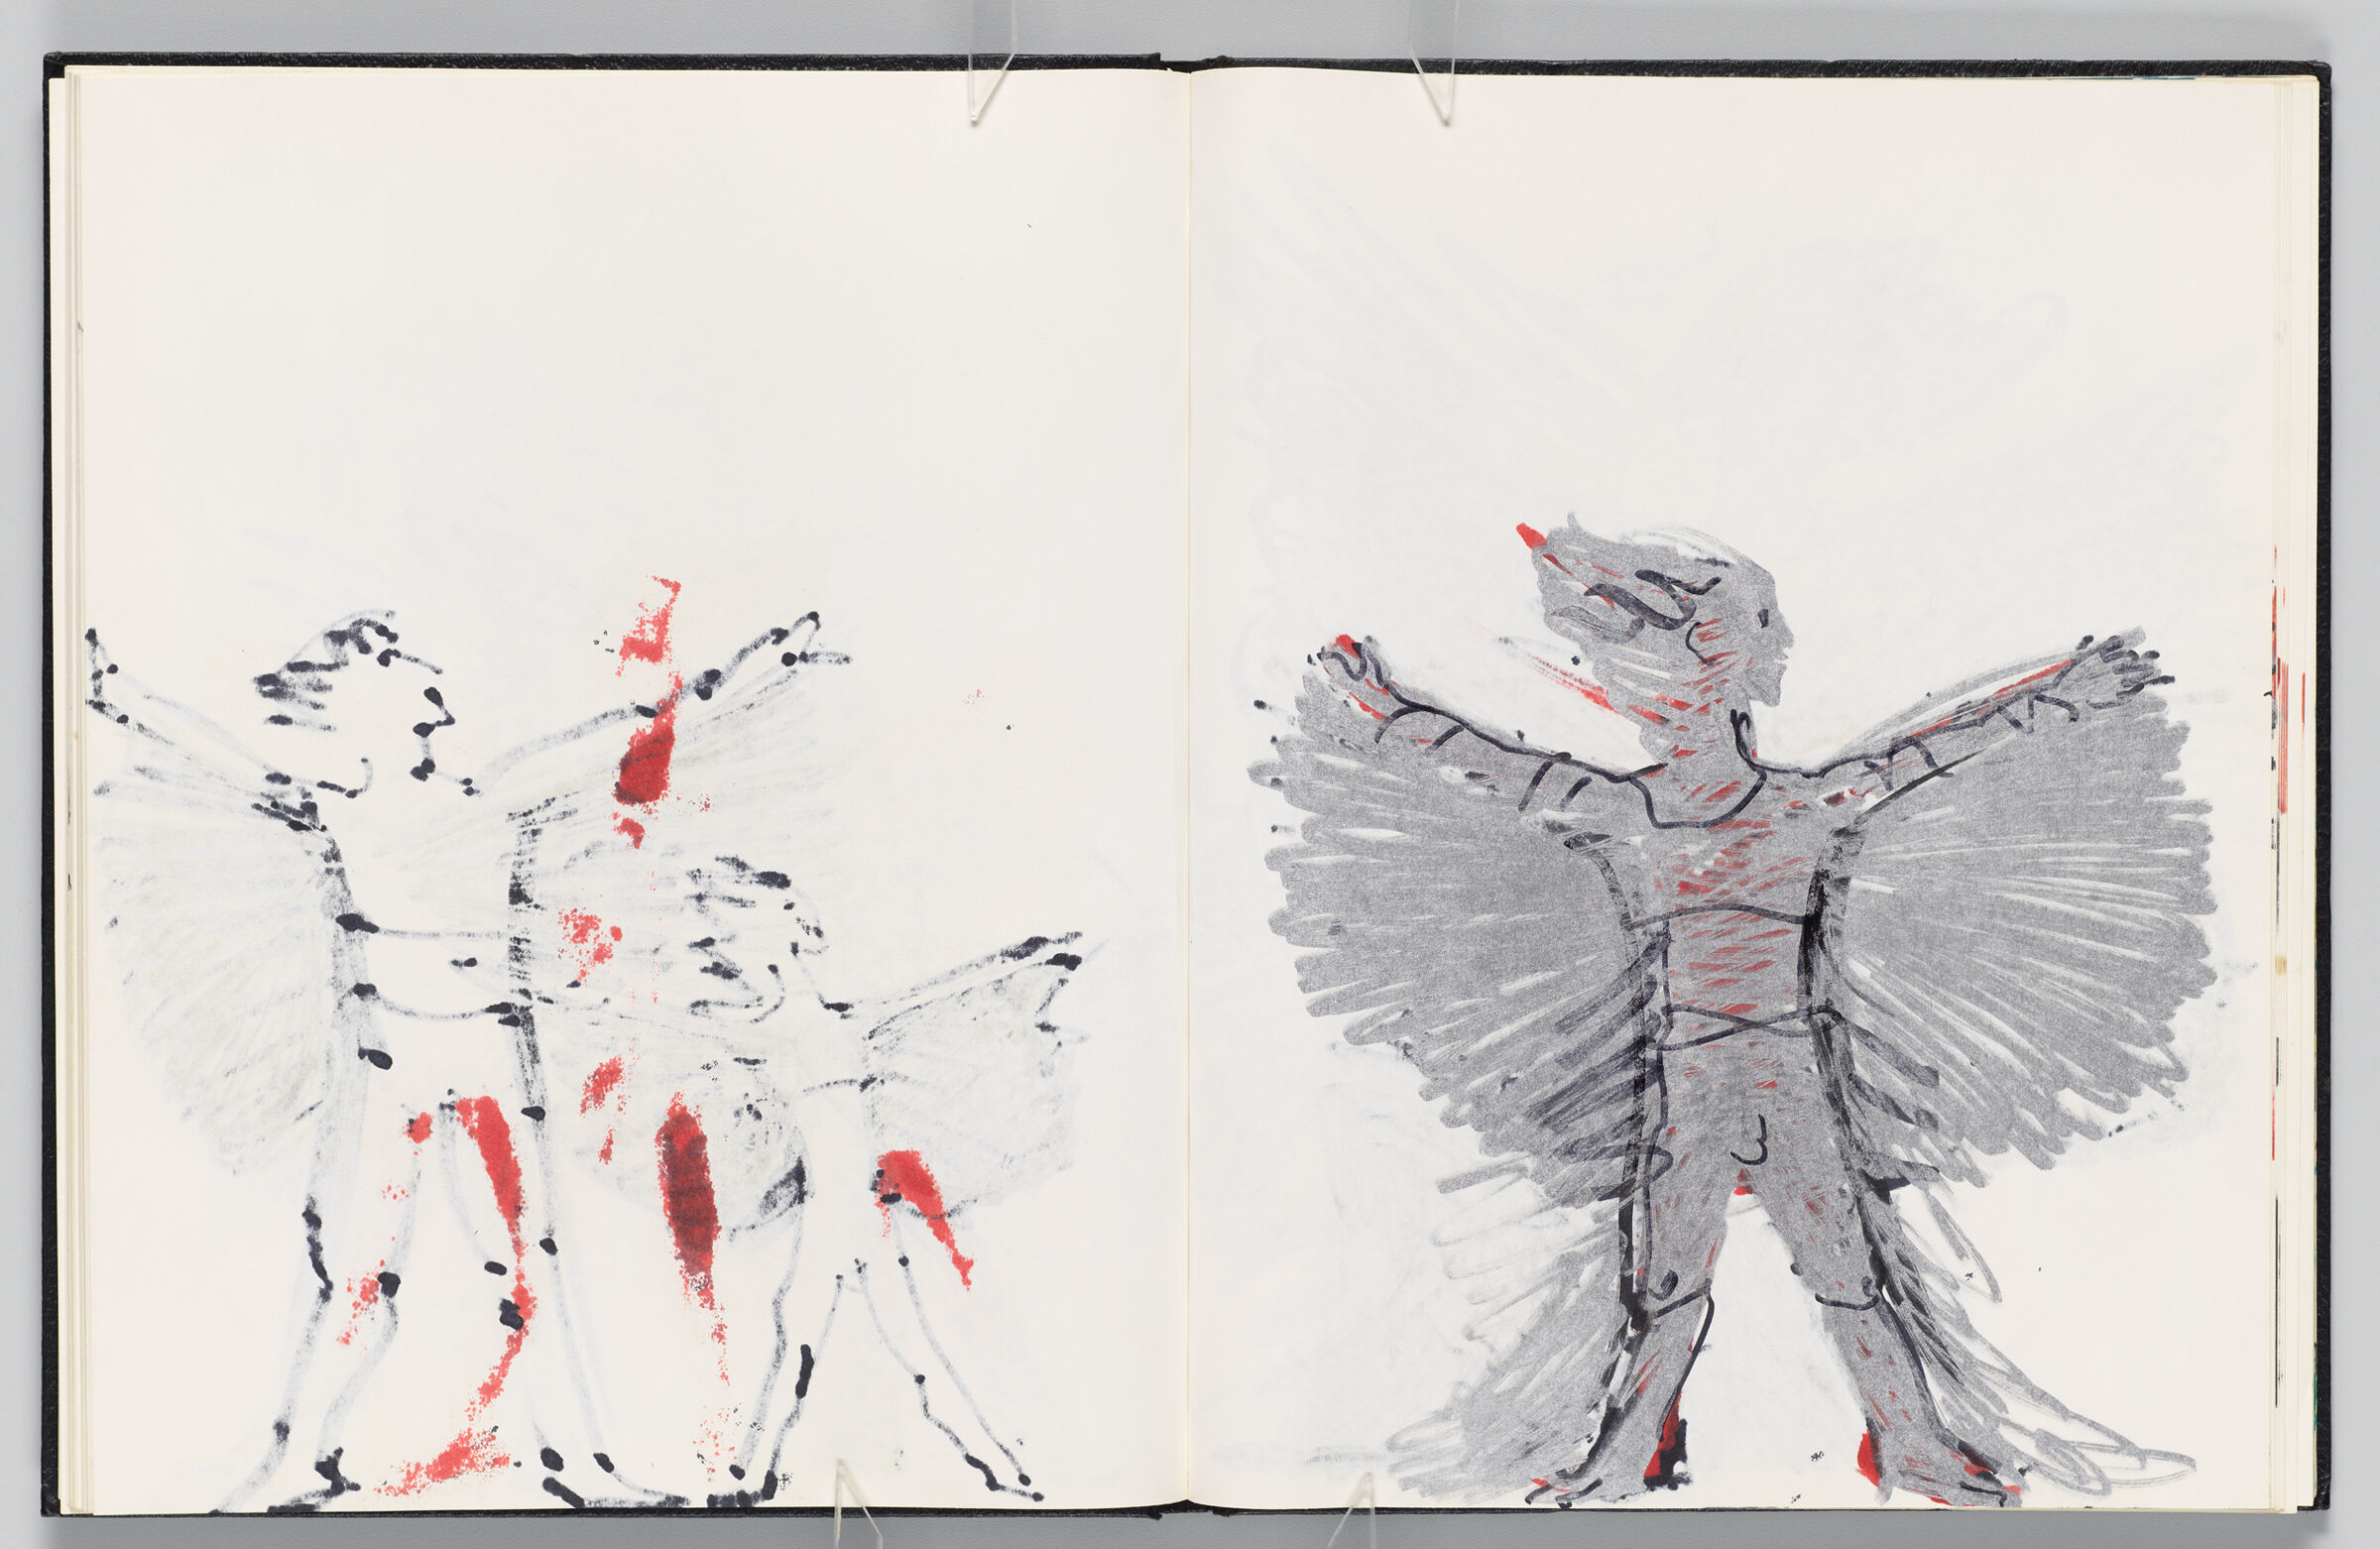 Untitled (Bleed-Through Of Previous Page, Left Page); Untitled (Icarus Costume, Right Page)